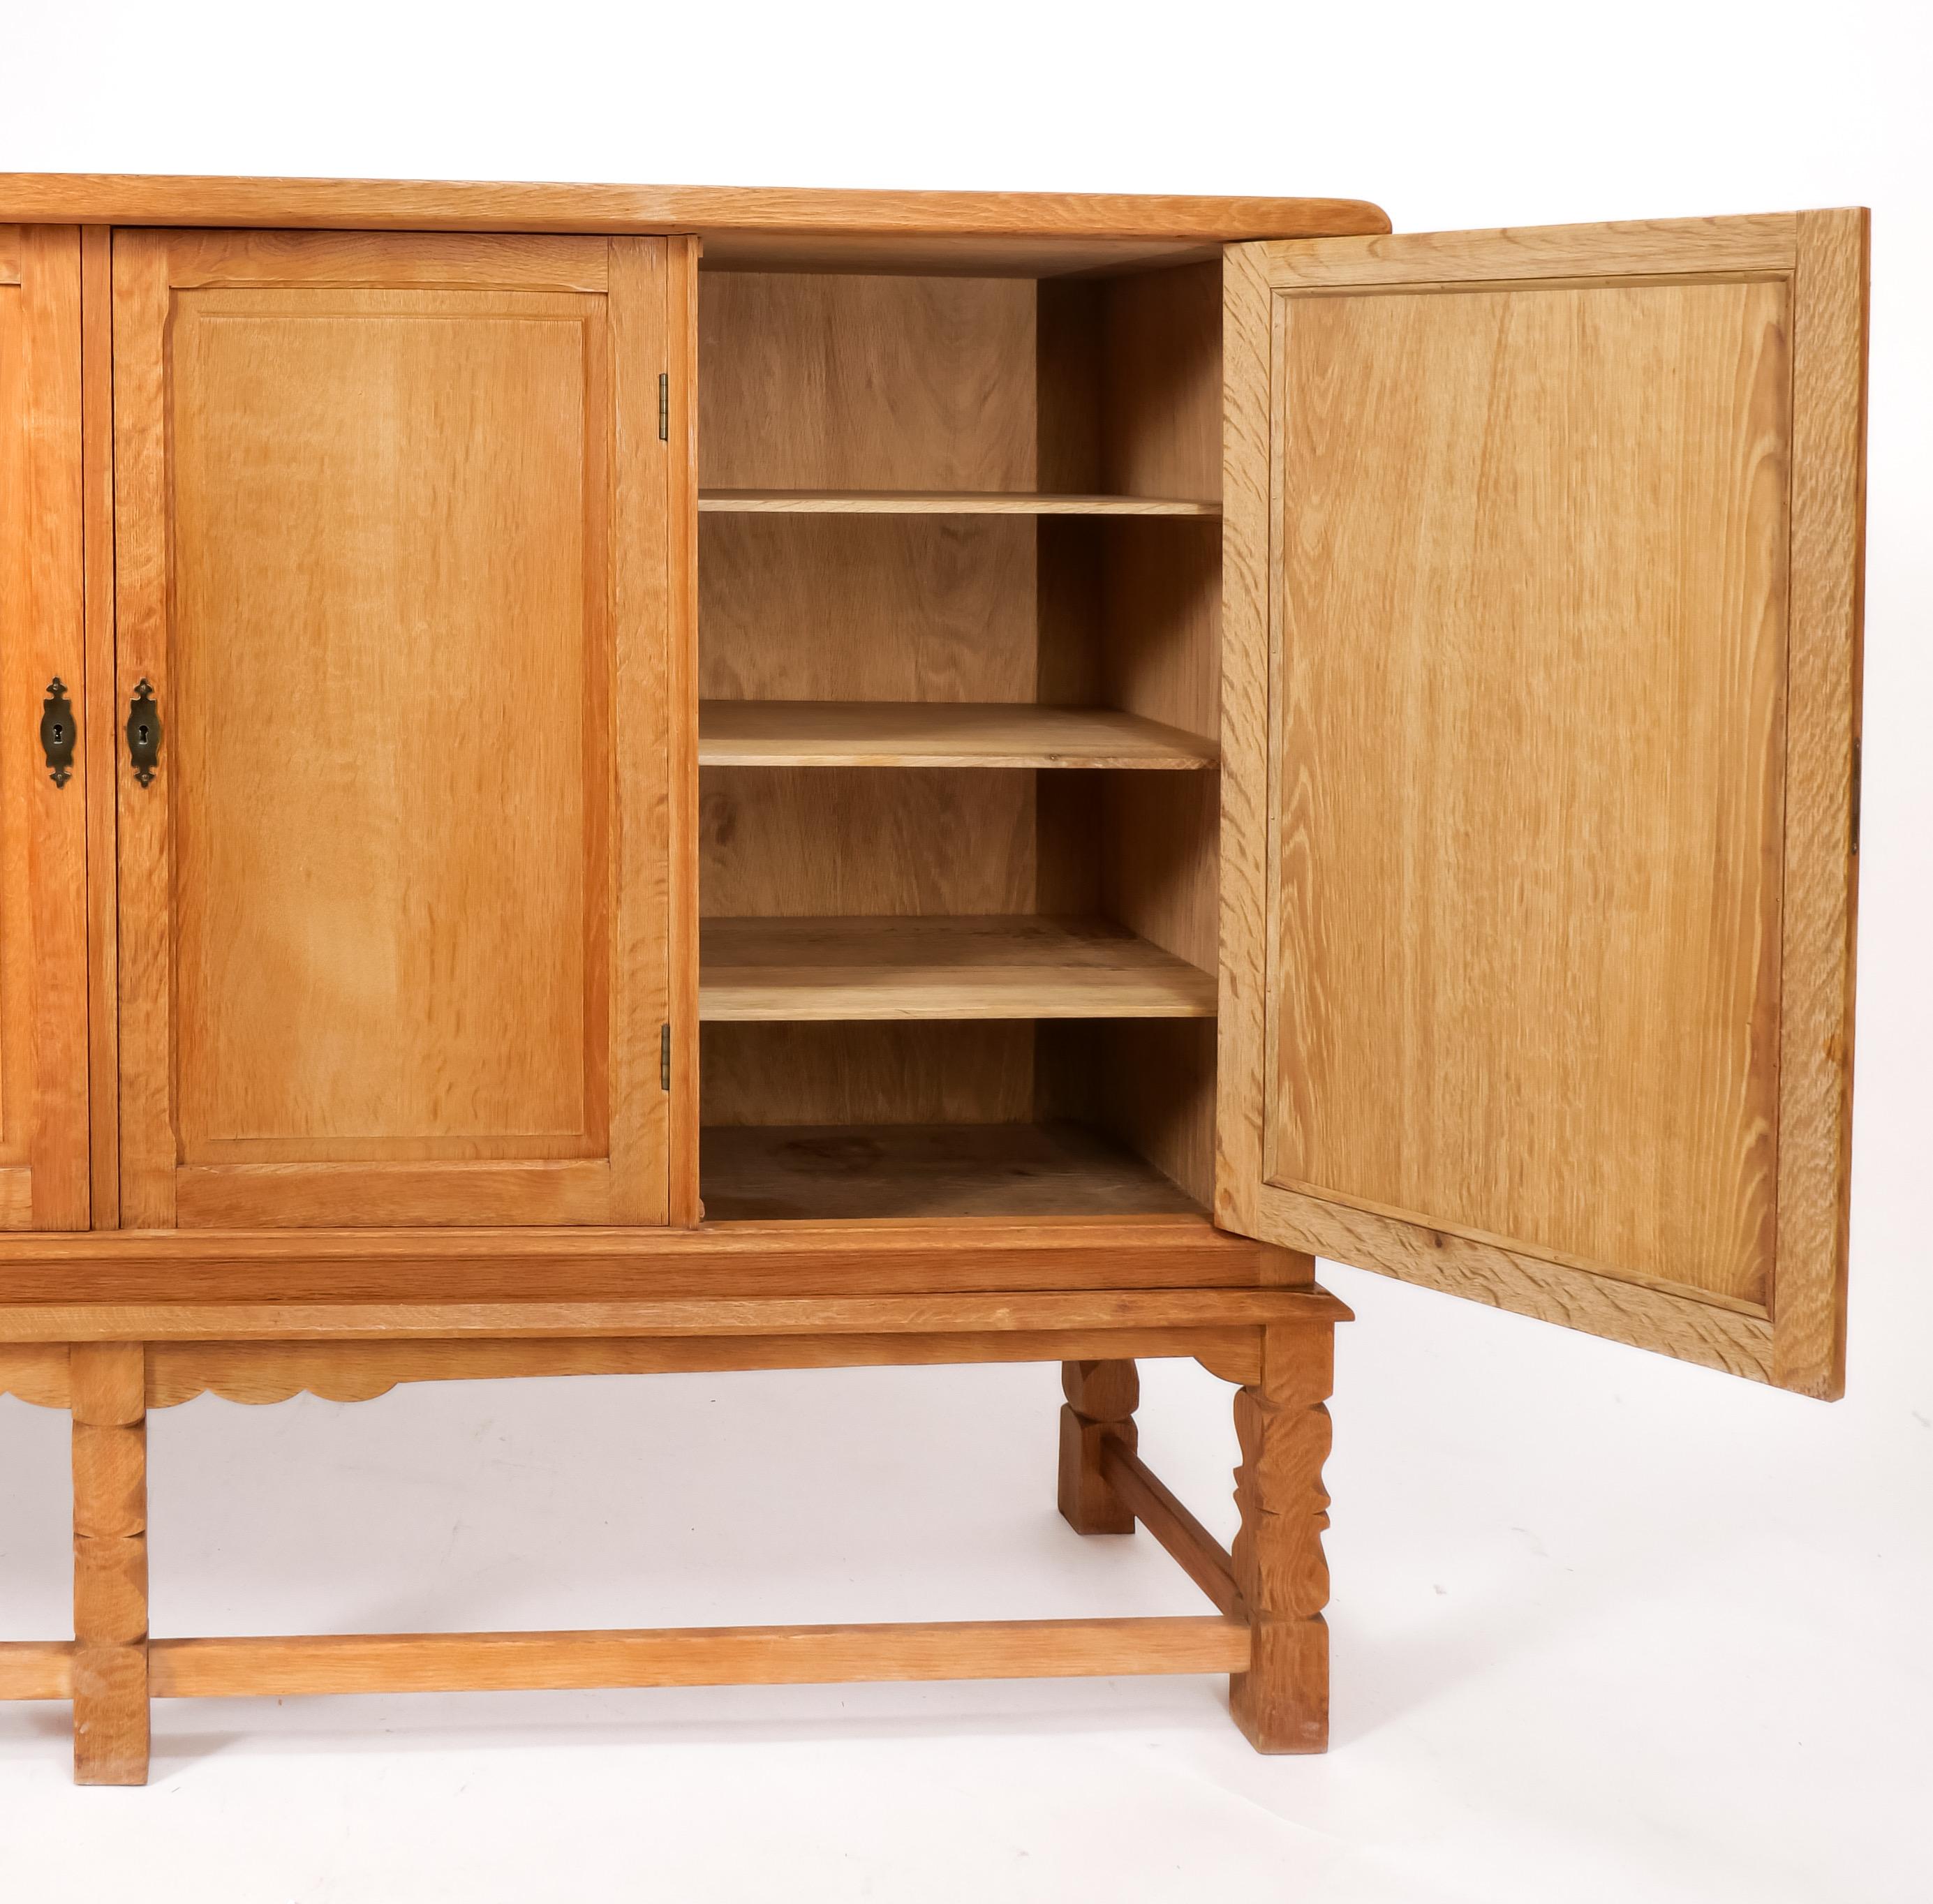 Grand solid oak cabinet by Danish designer Henry Kjaernulf, sometimes known as “Henning.” His style is distinctive and characteristic of it are the whimsical almost baroque-styled legs. The pieces are both modern and rustic and work well in a